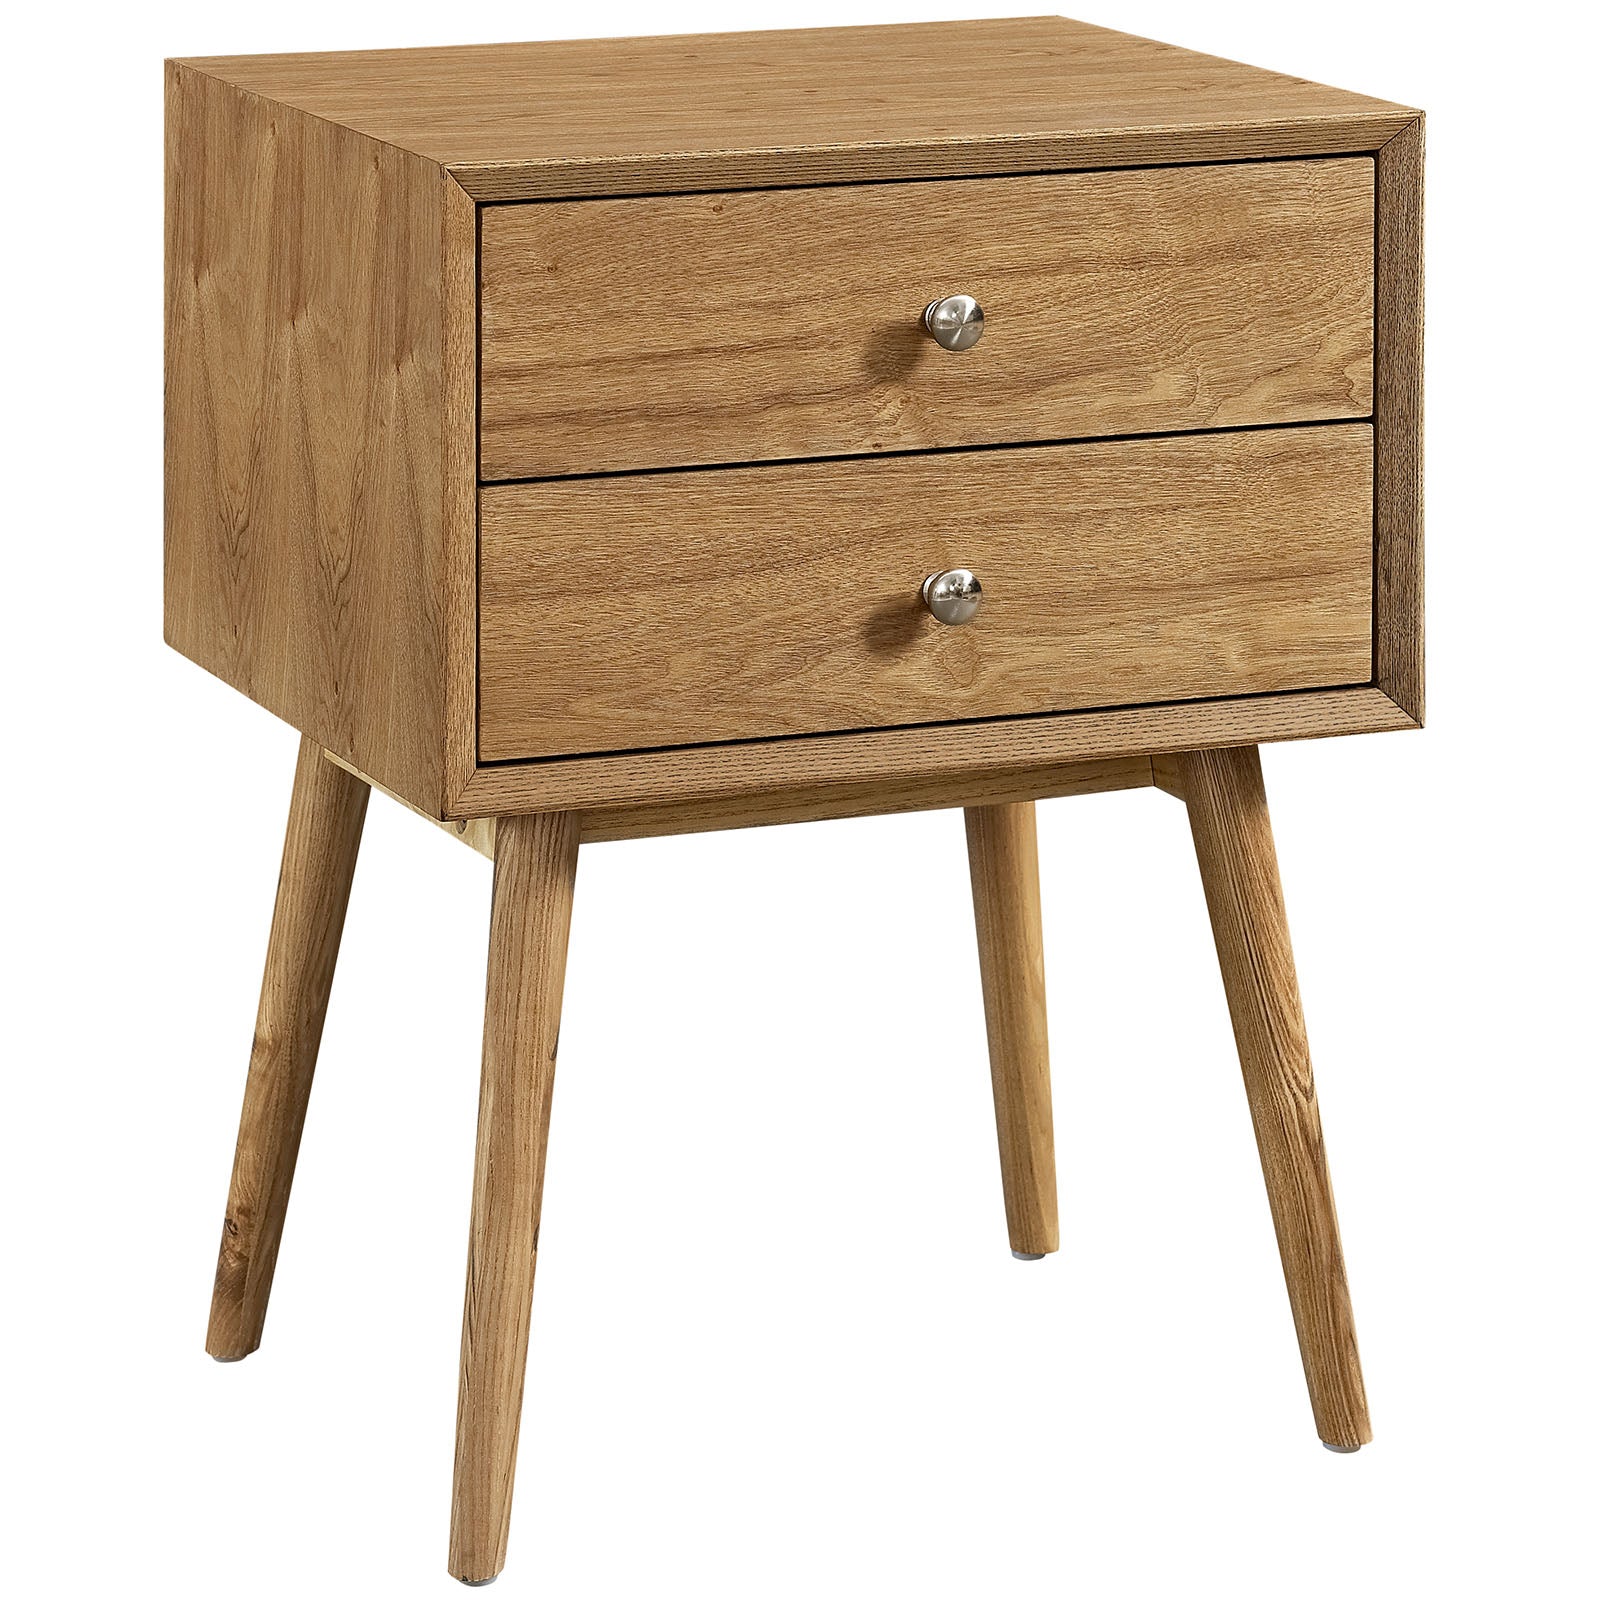 Modway Nightstands & Side Tables - Dispatch Nightstand Natural Natural